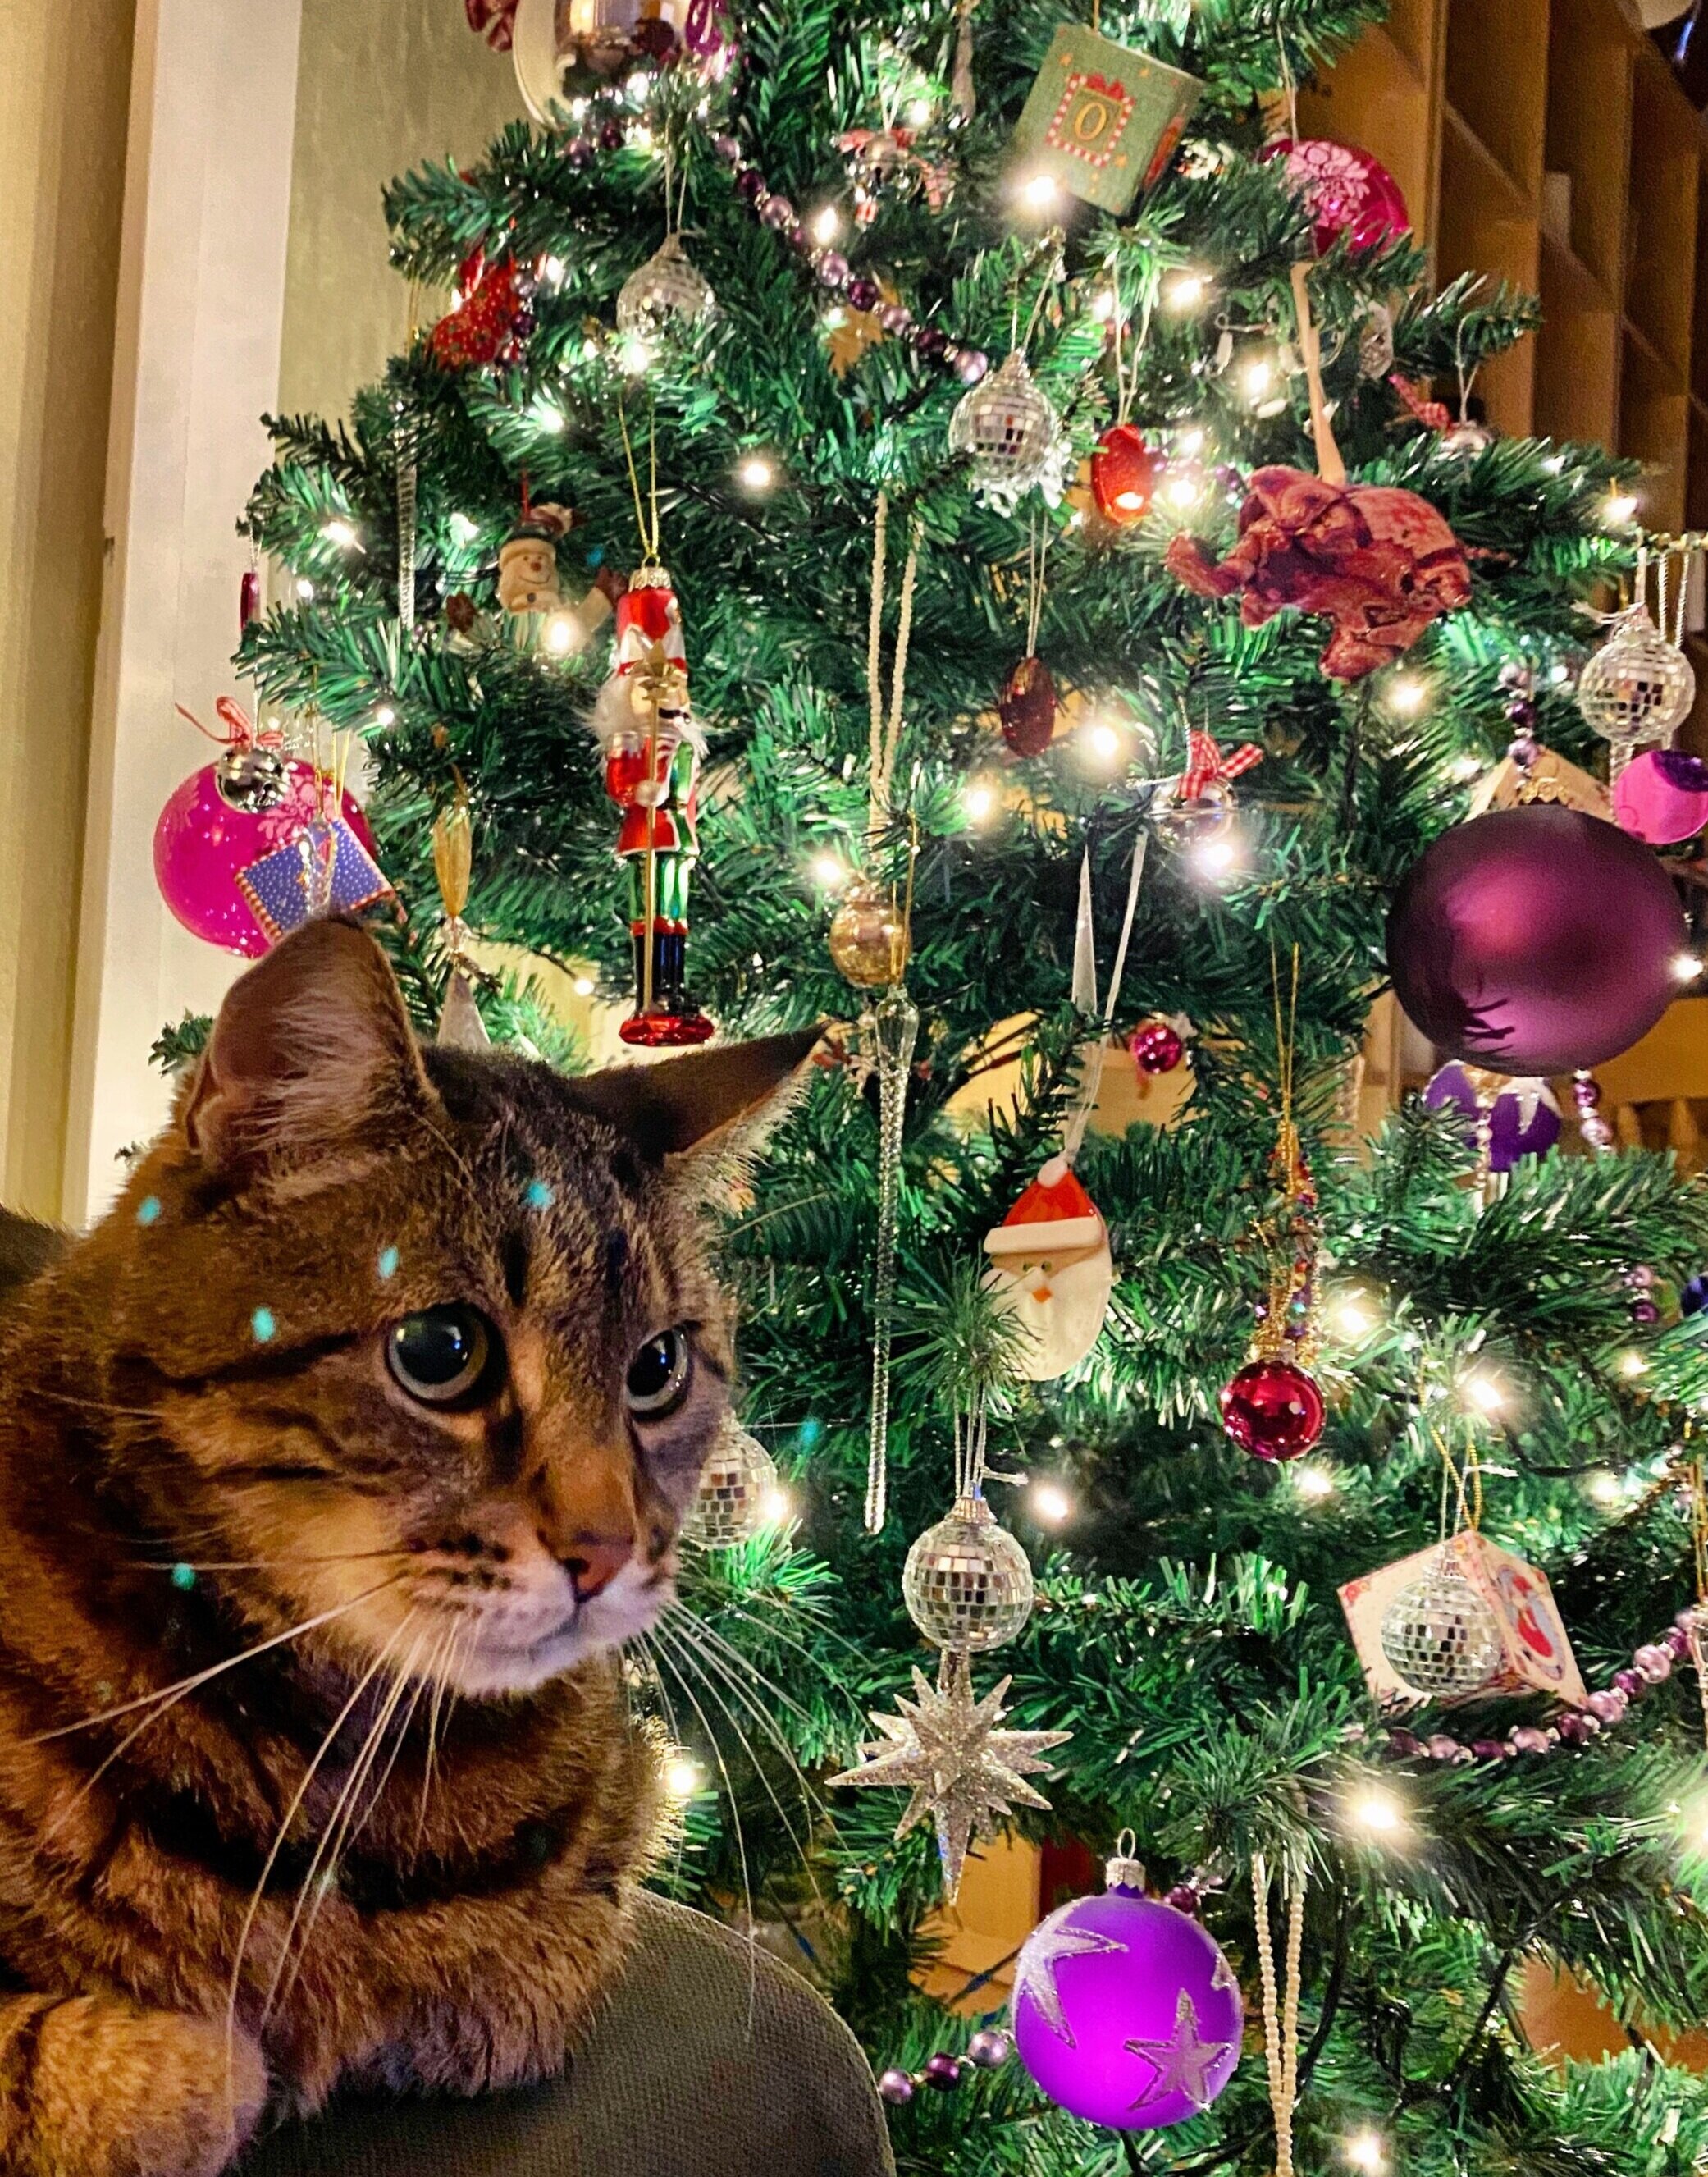 And here’s our Christmas tree together with Ronnie the cat!